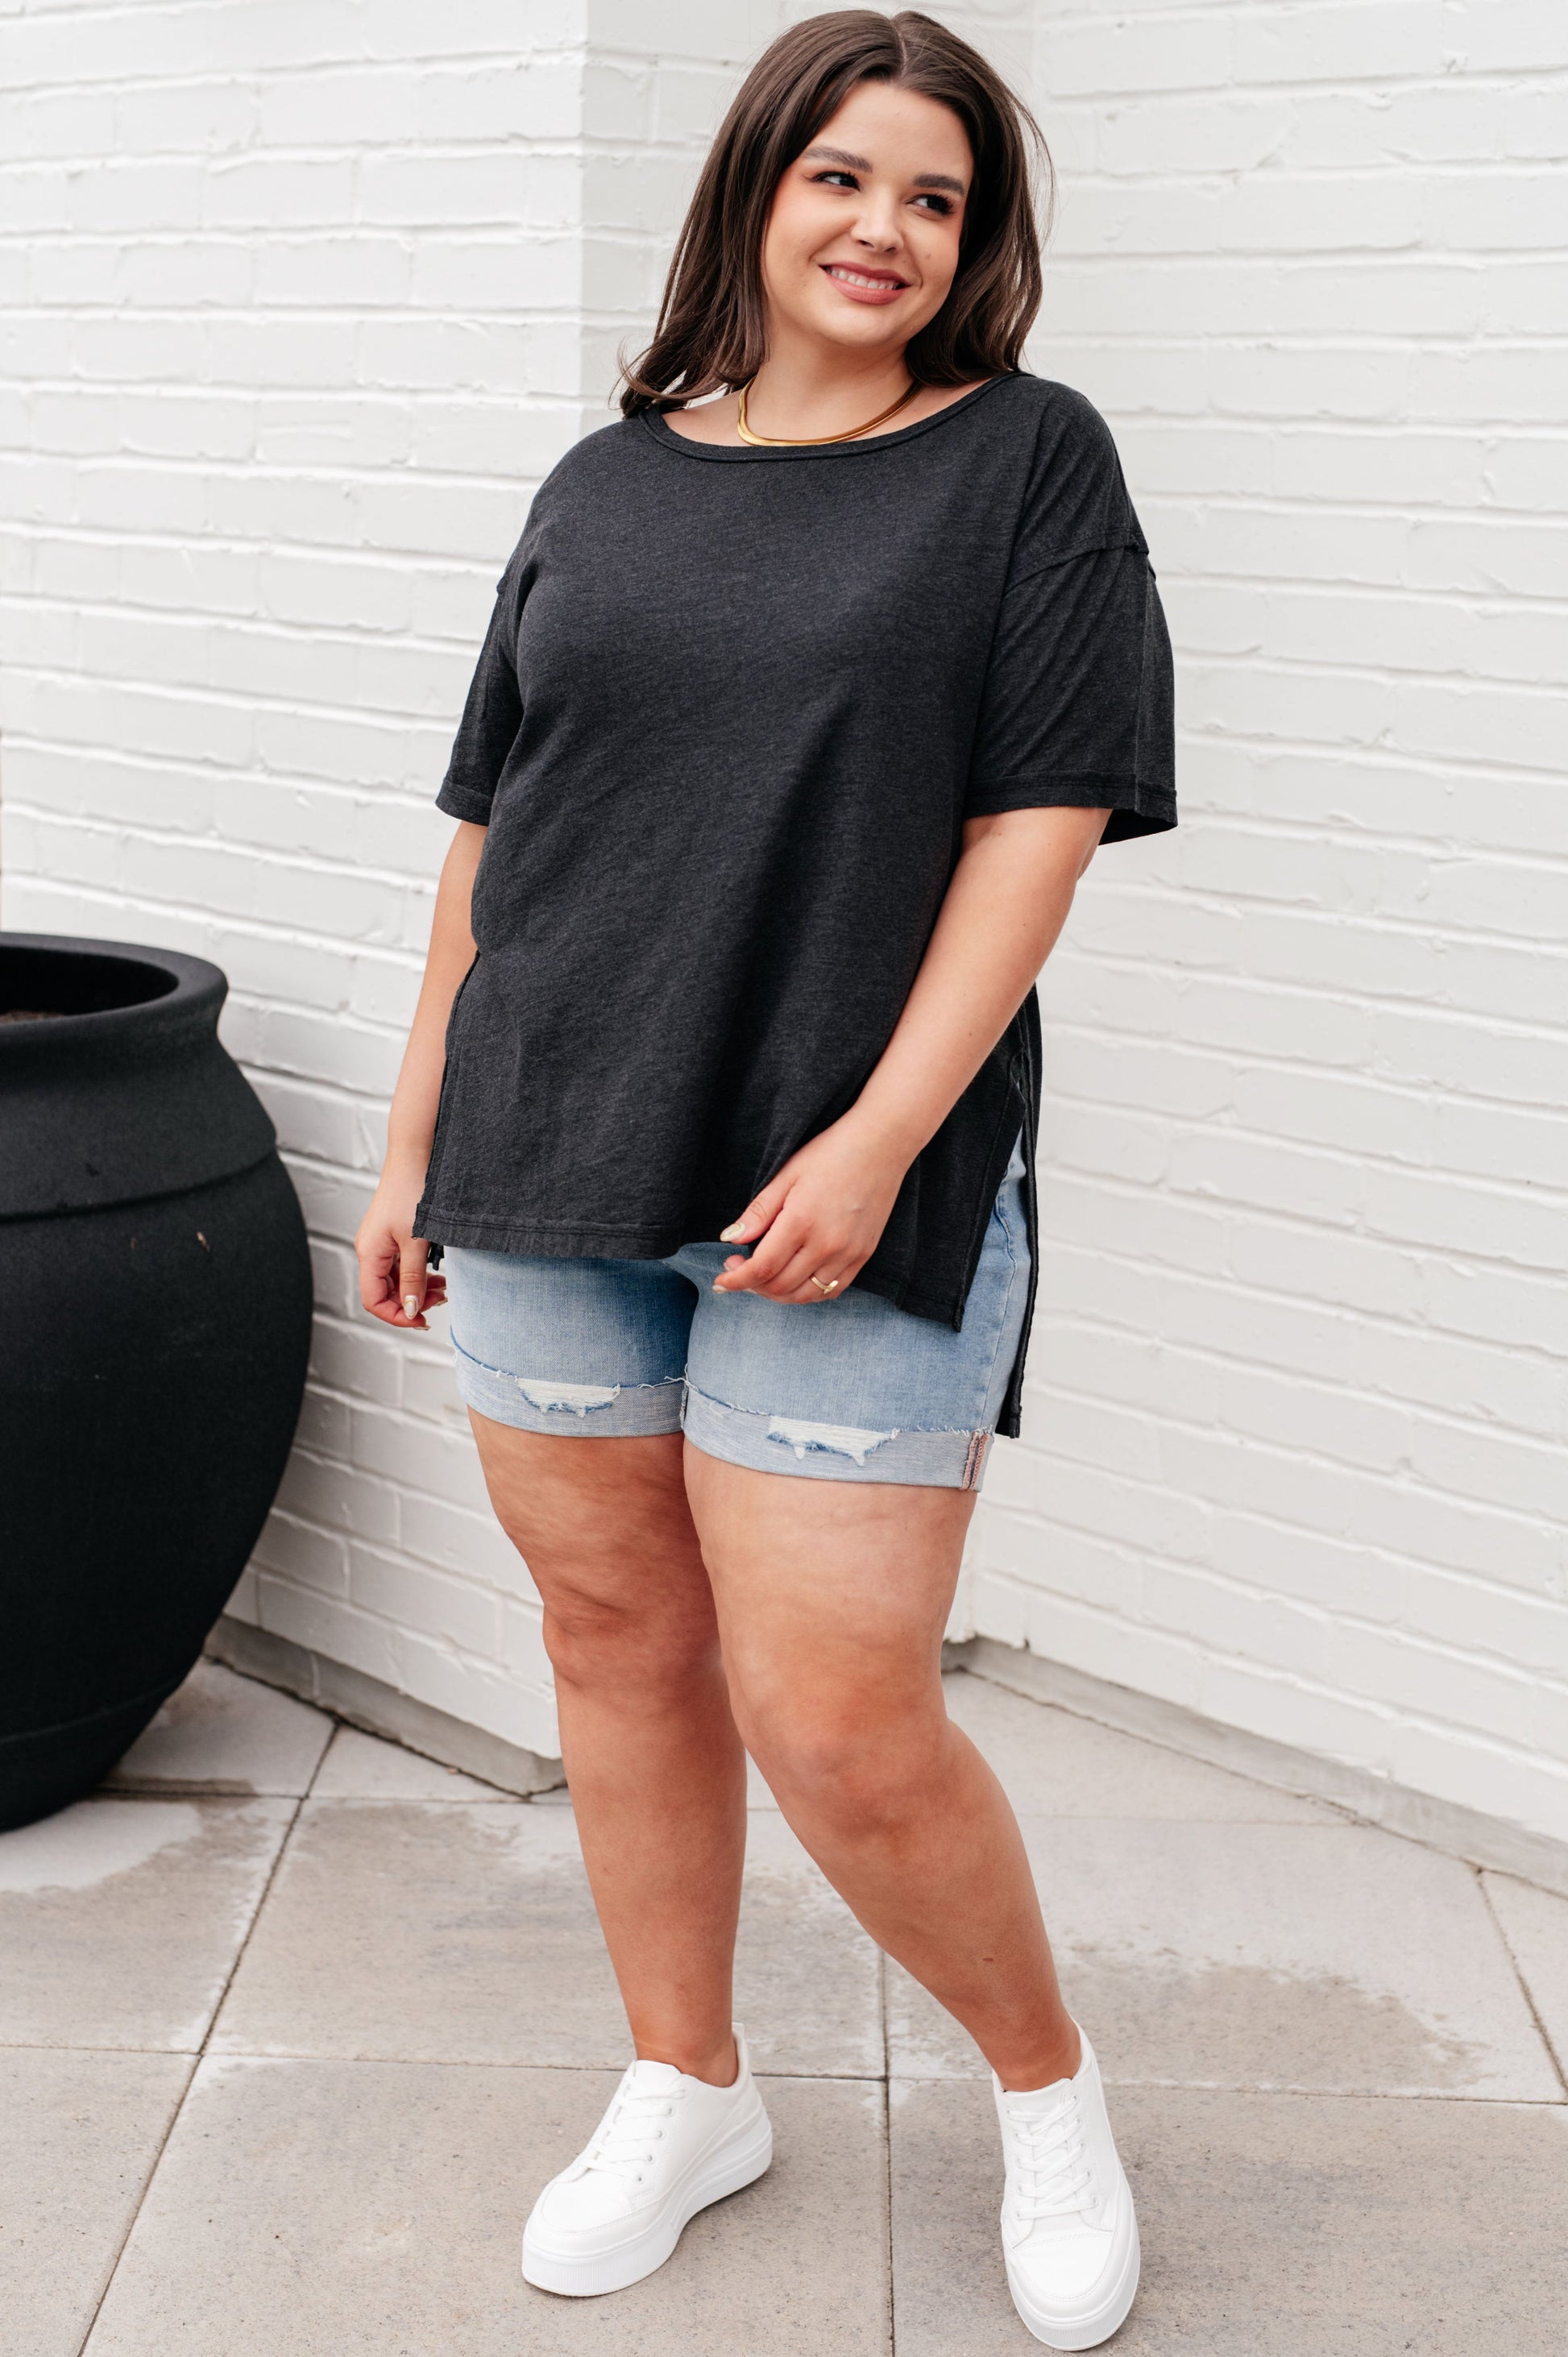 Let Me Live Relaxed Tee in Black - Southern Divas Boutique